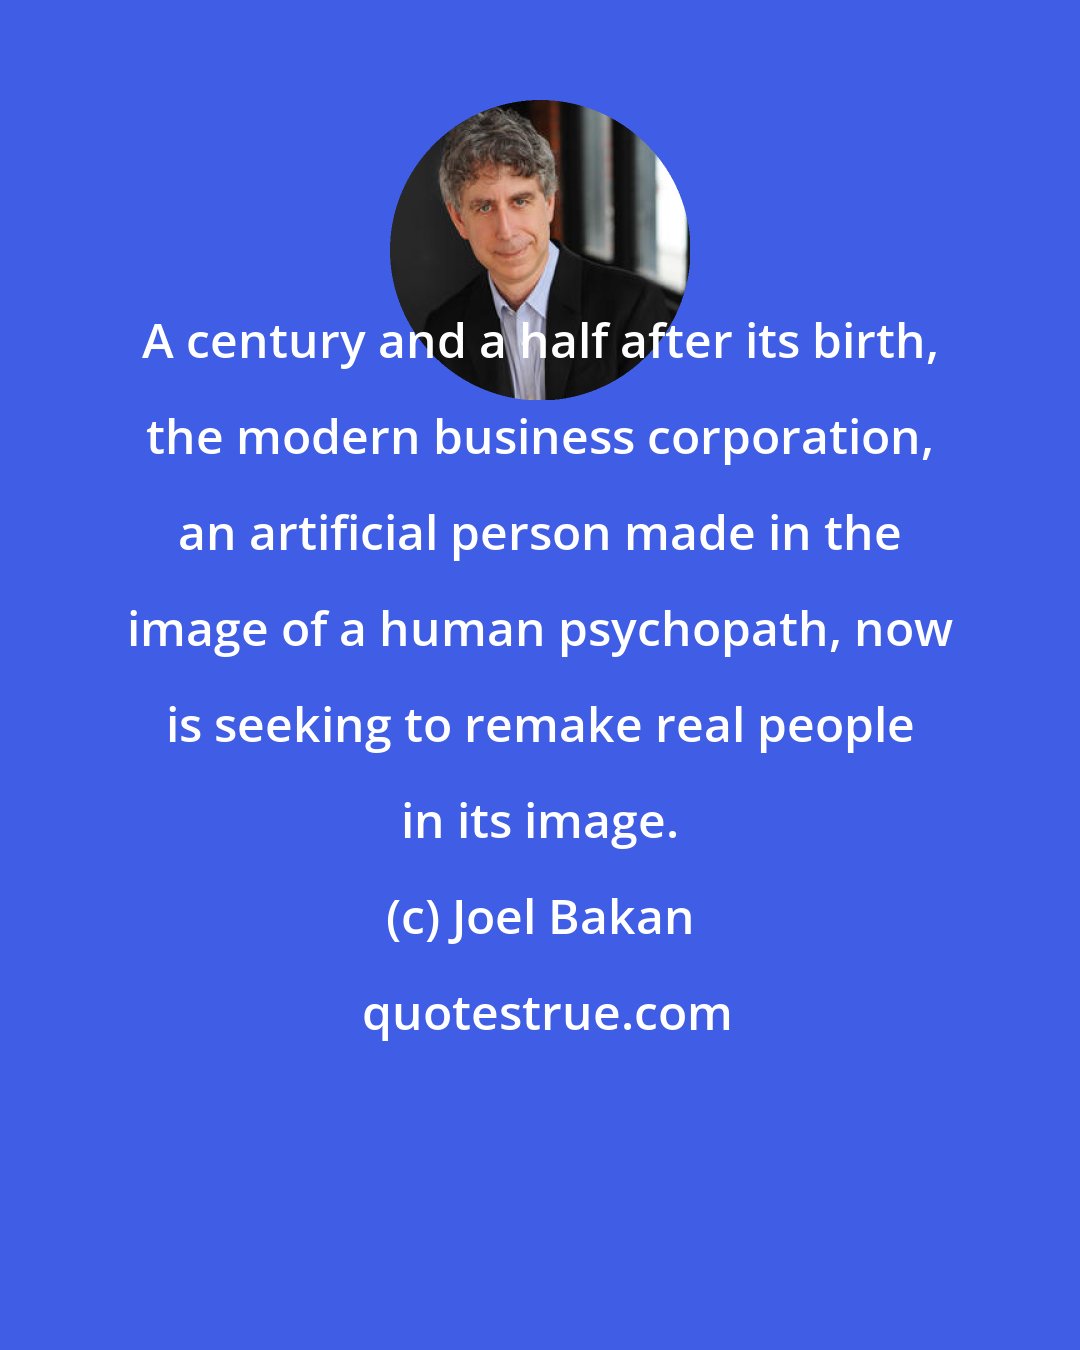 Joel Bakan: A century and a half after its birth, the modern business corporation, an artificial person made in the image of a human psychopath, now is seeking to remake real people in its image.